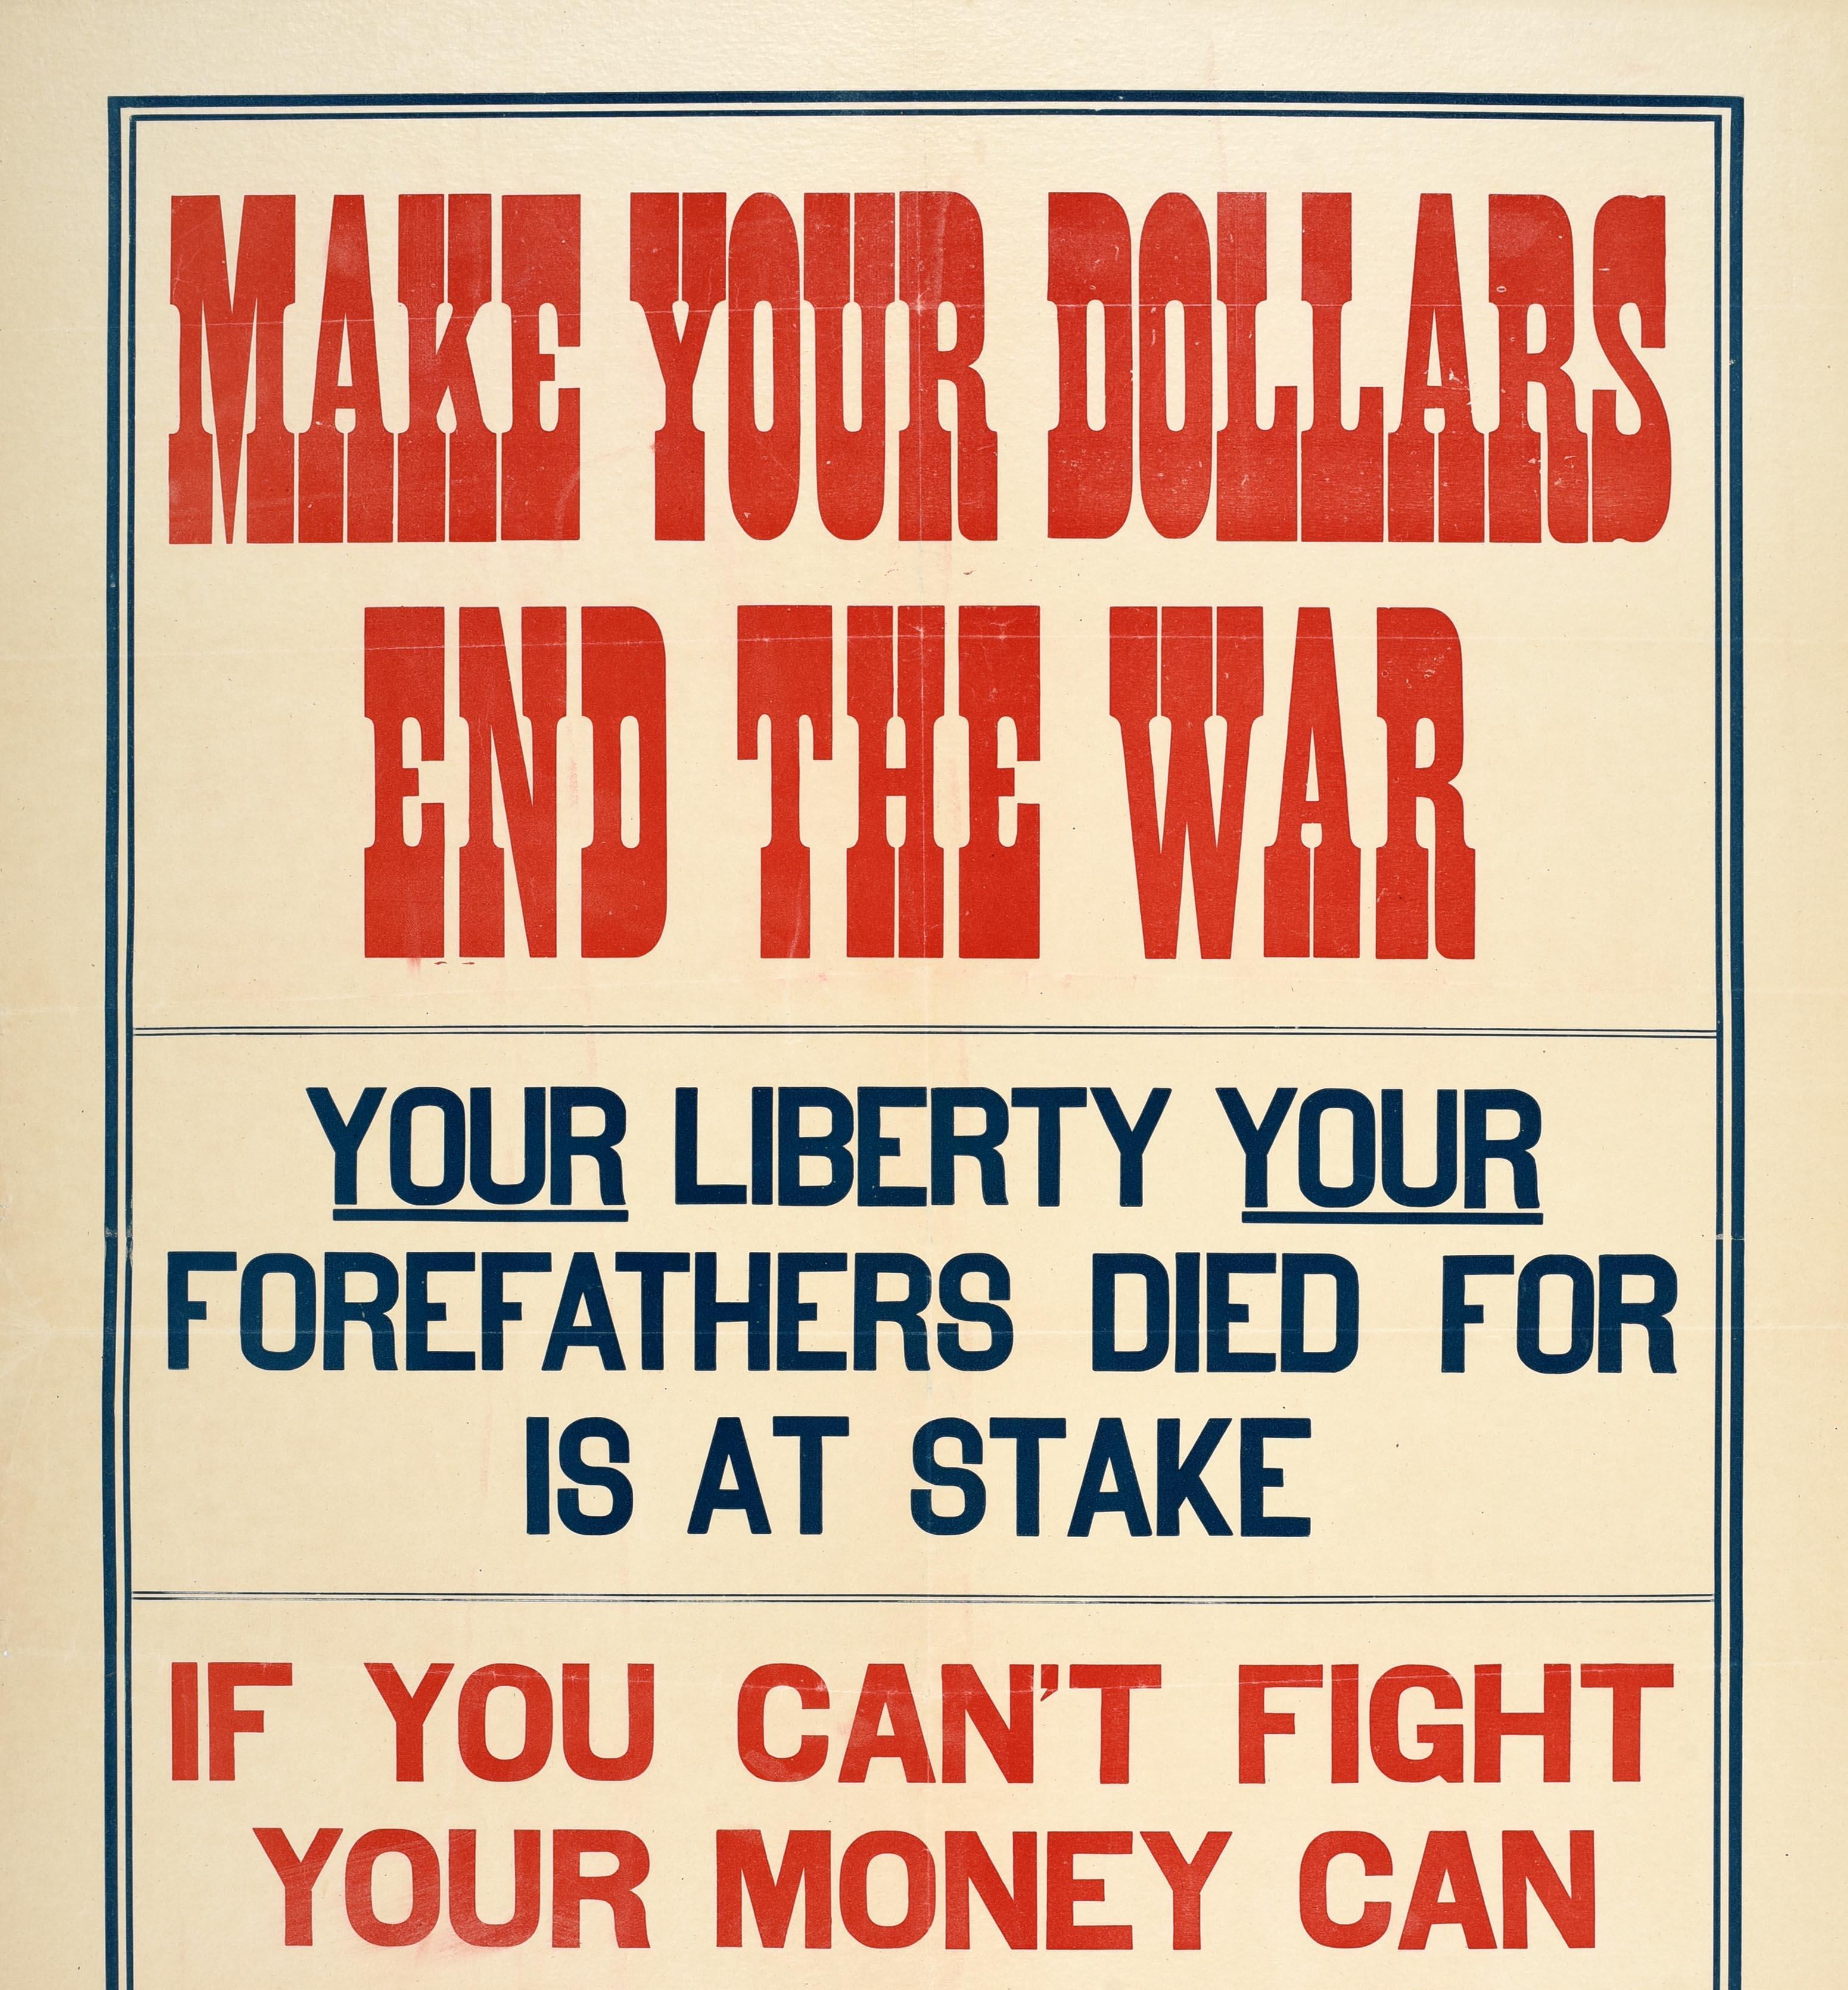 Originales antikes Kriegsanleihe-Poster aus dem Ersten Weltkrieg mit fetten roten und blauen Buchstaben - Make your dollars end the war Your liberty your forefathers died for is at stake If you can't fight your money can Buy a liberty bond and Uncle